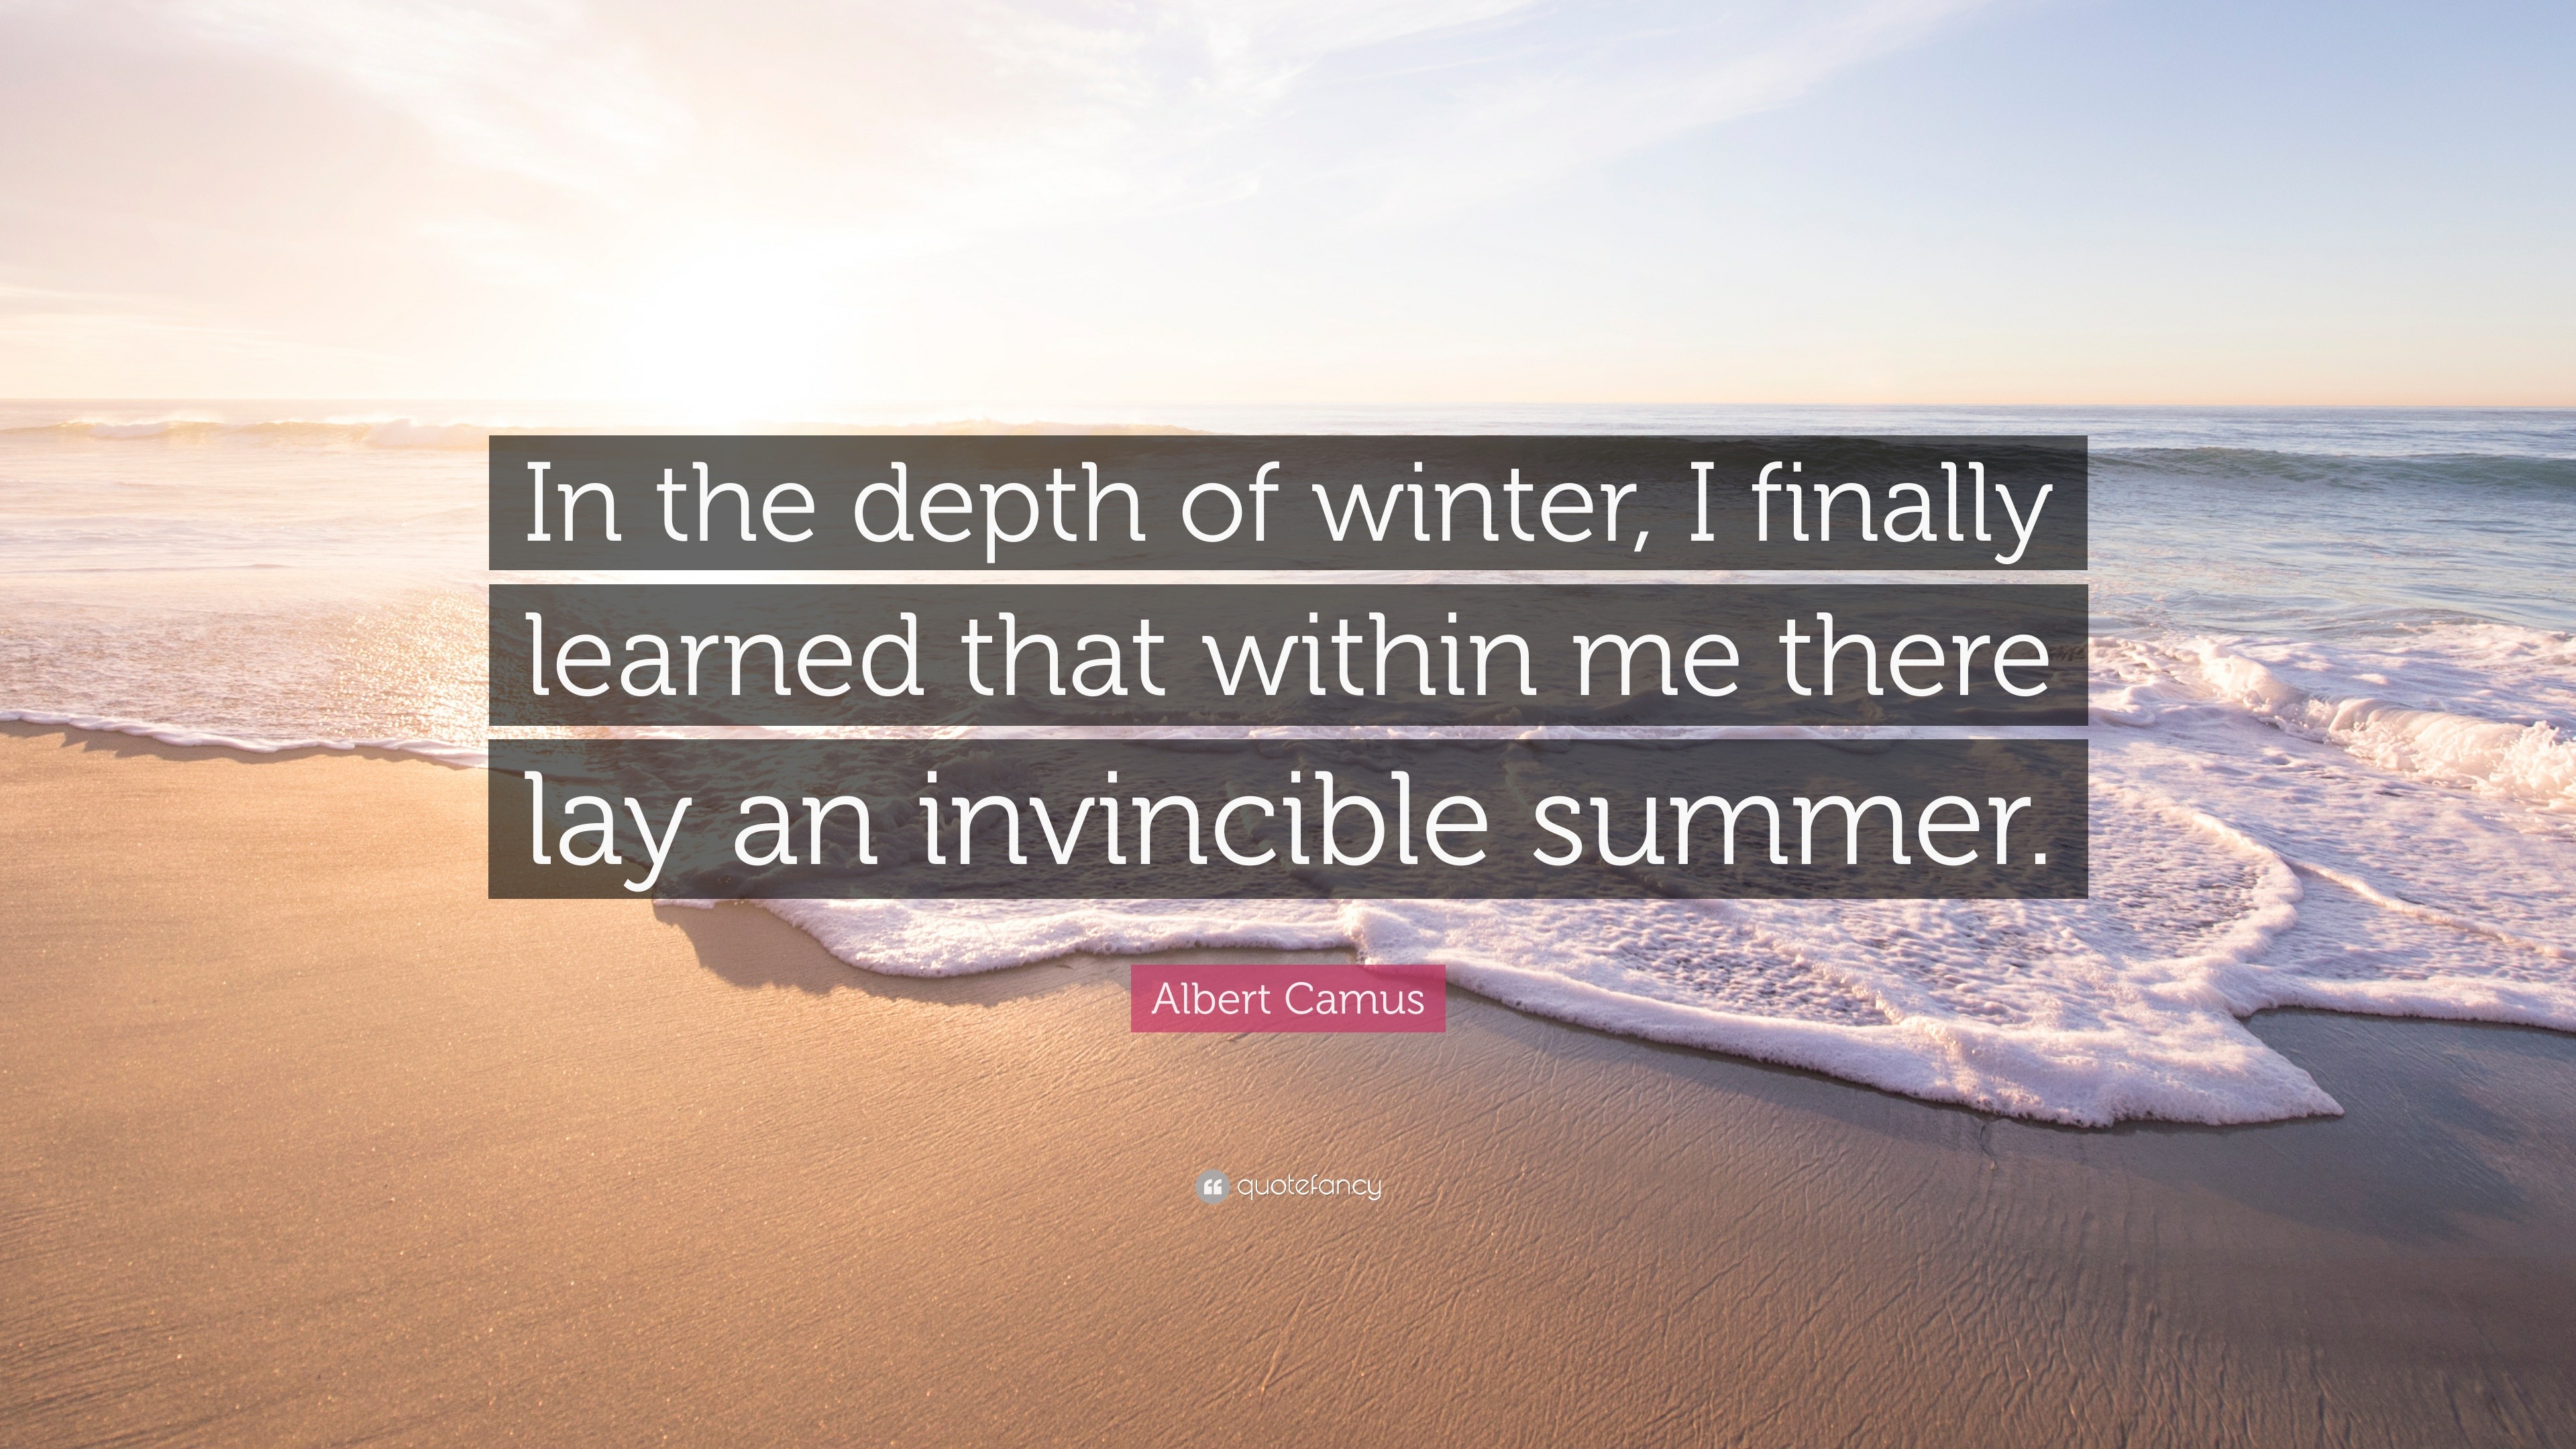 I finally learned that within me there lay an invincible summer book quote ...